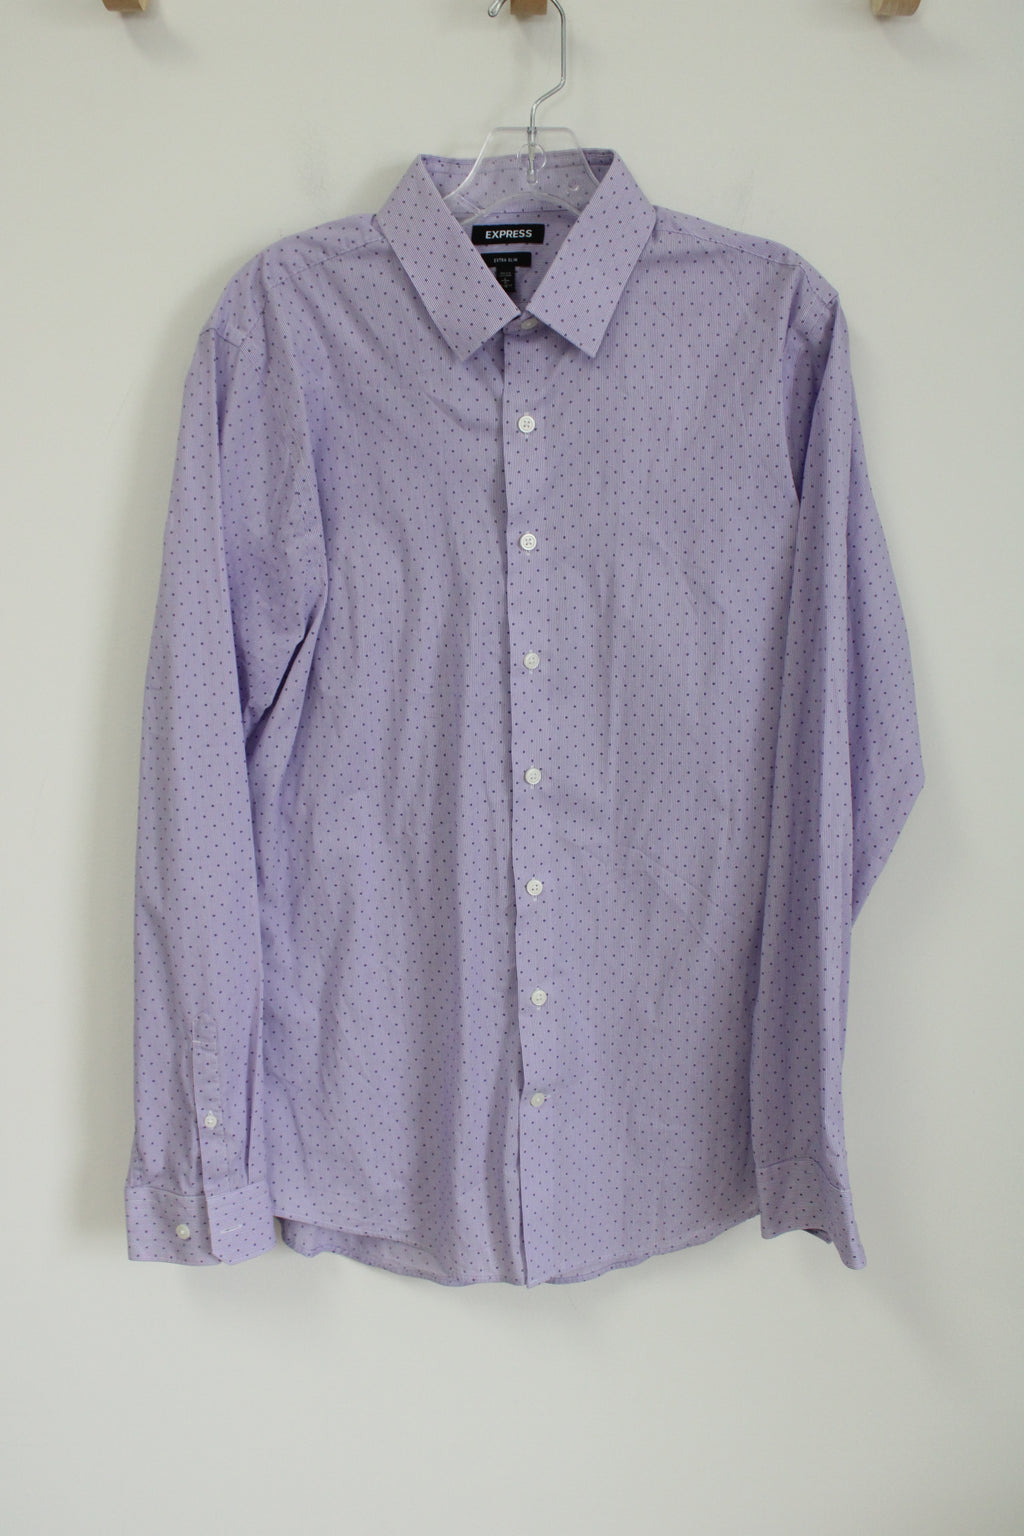 Express Extra Slim Purple Patterned Button Down Shirt | L